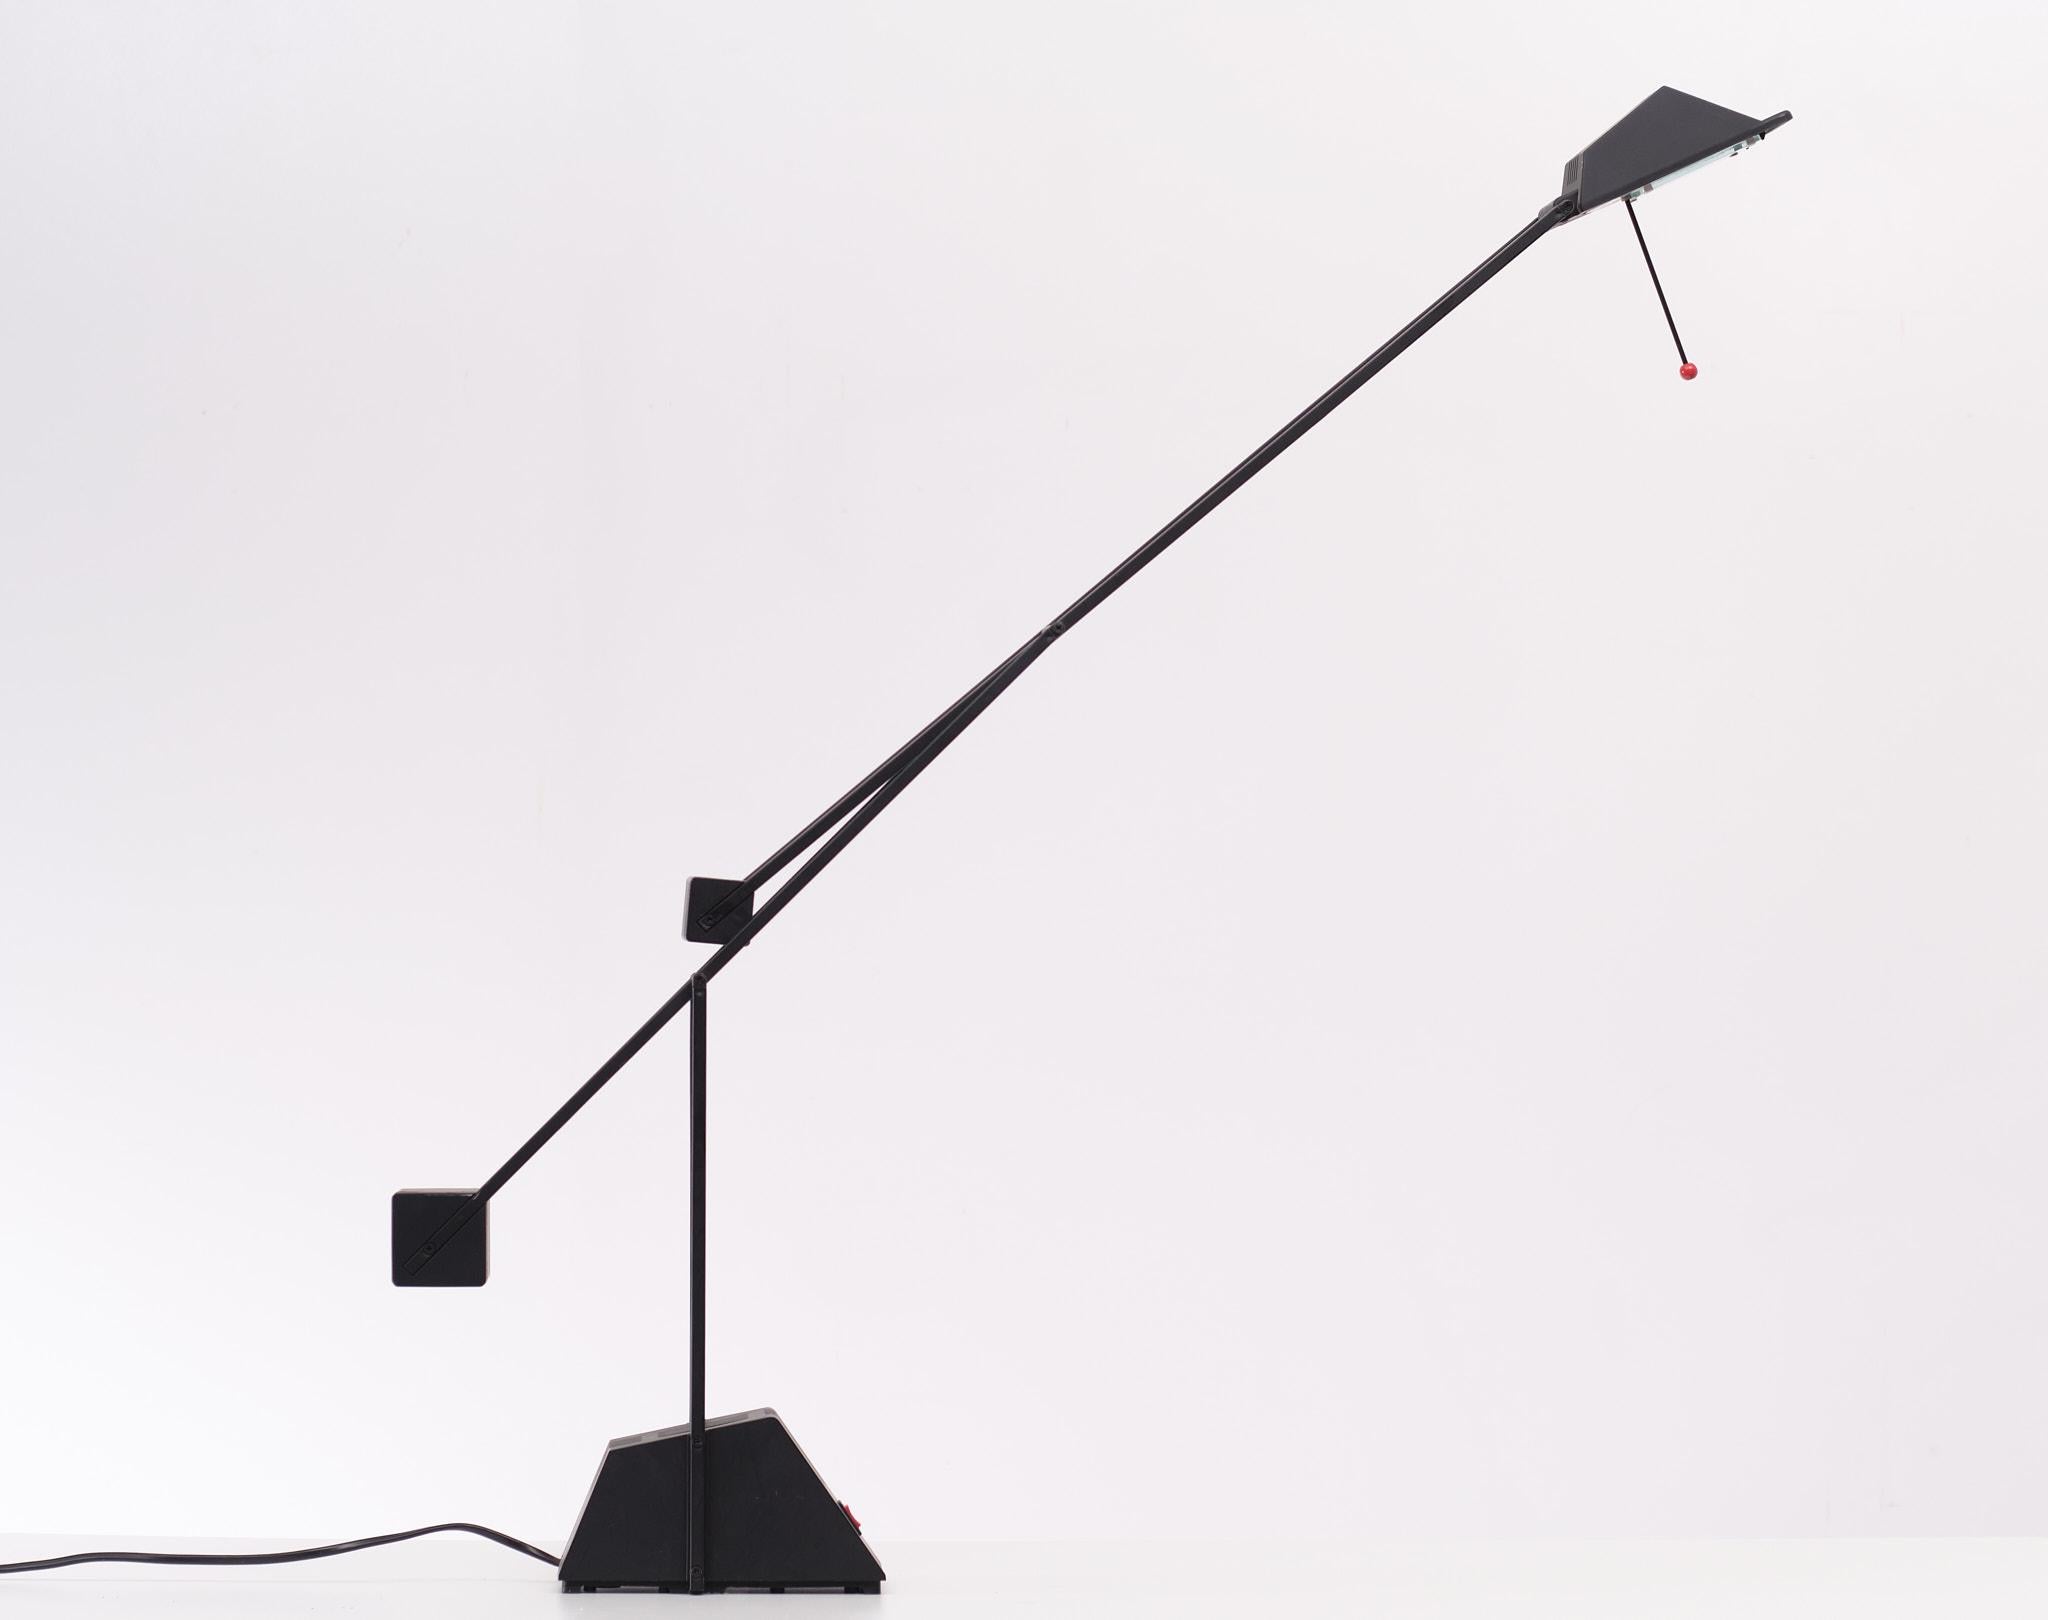 Very nice counter balance Hustadt Luchten Desk lamp Halogen 1980s 
2 light modes. Adjustable in all directions. Perfect working lamp.